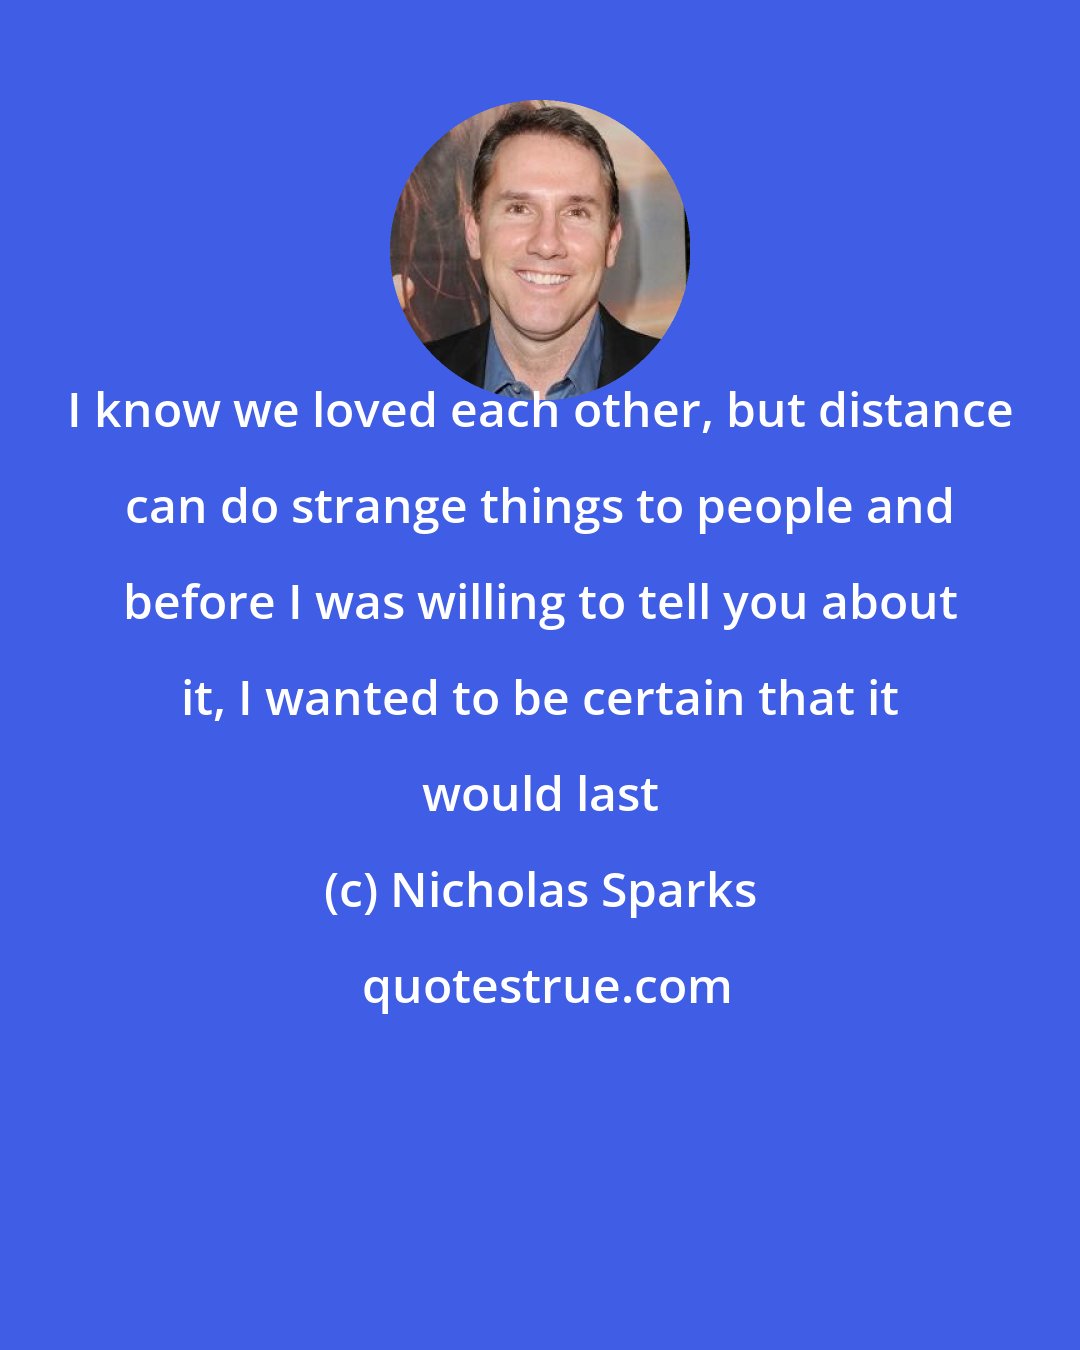 Nicholas Sparks: I know we loved each other, but distance can do strange things to people and before I was willing to tell you about it, I wanted to be certain that it would last